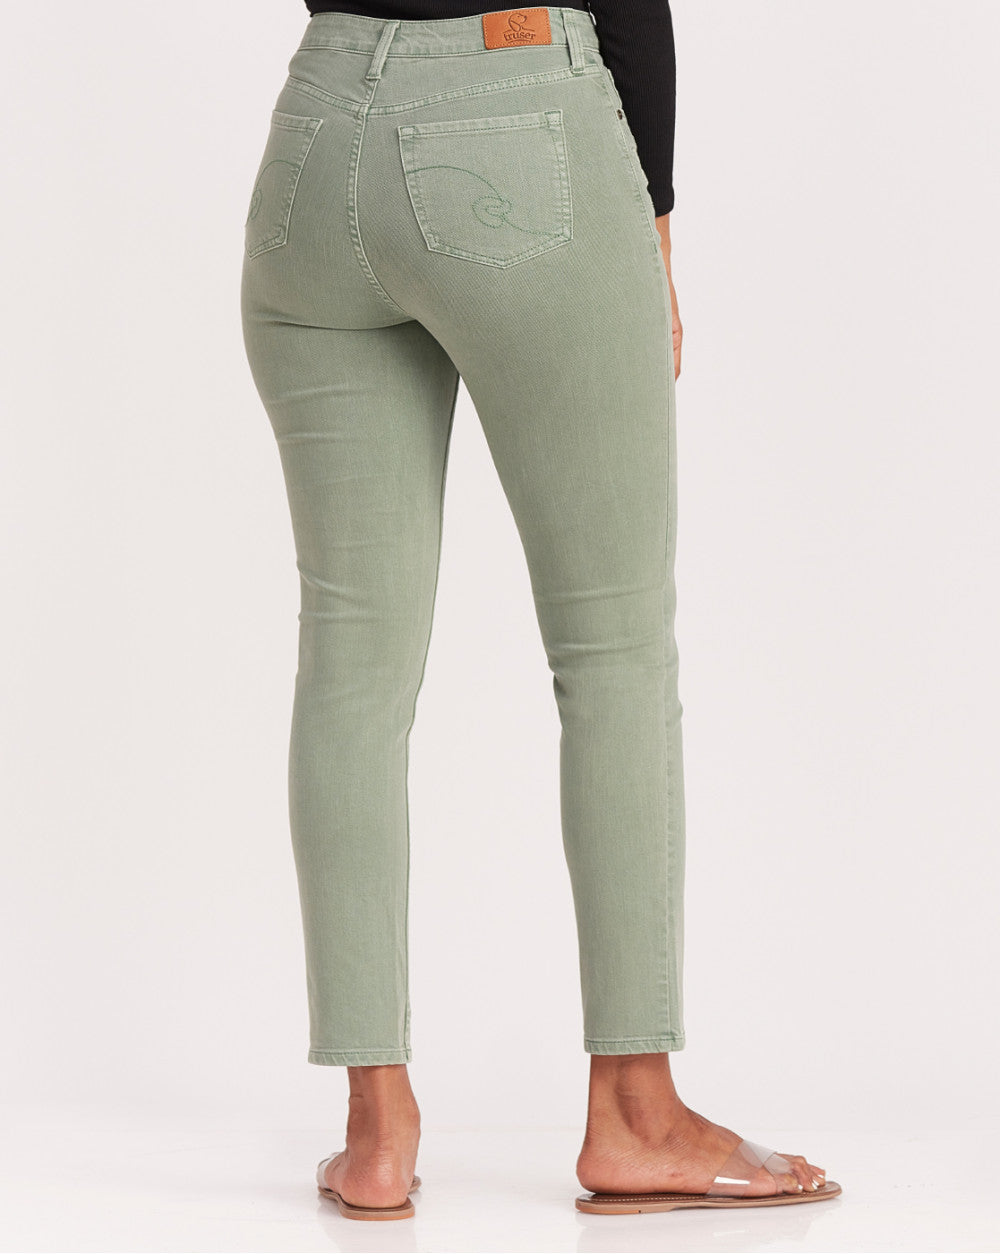 Skinny Fit High Waist Floral Embroidered Colored Jeans - Washed Jade